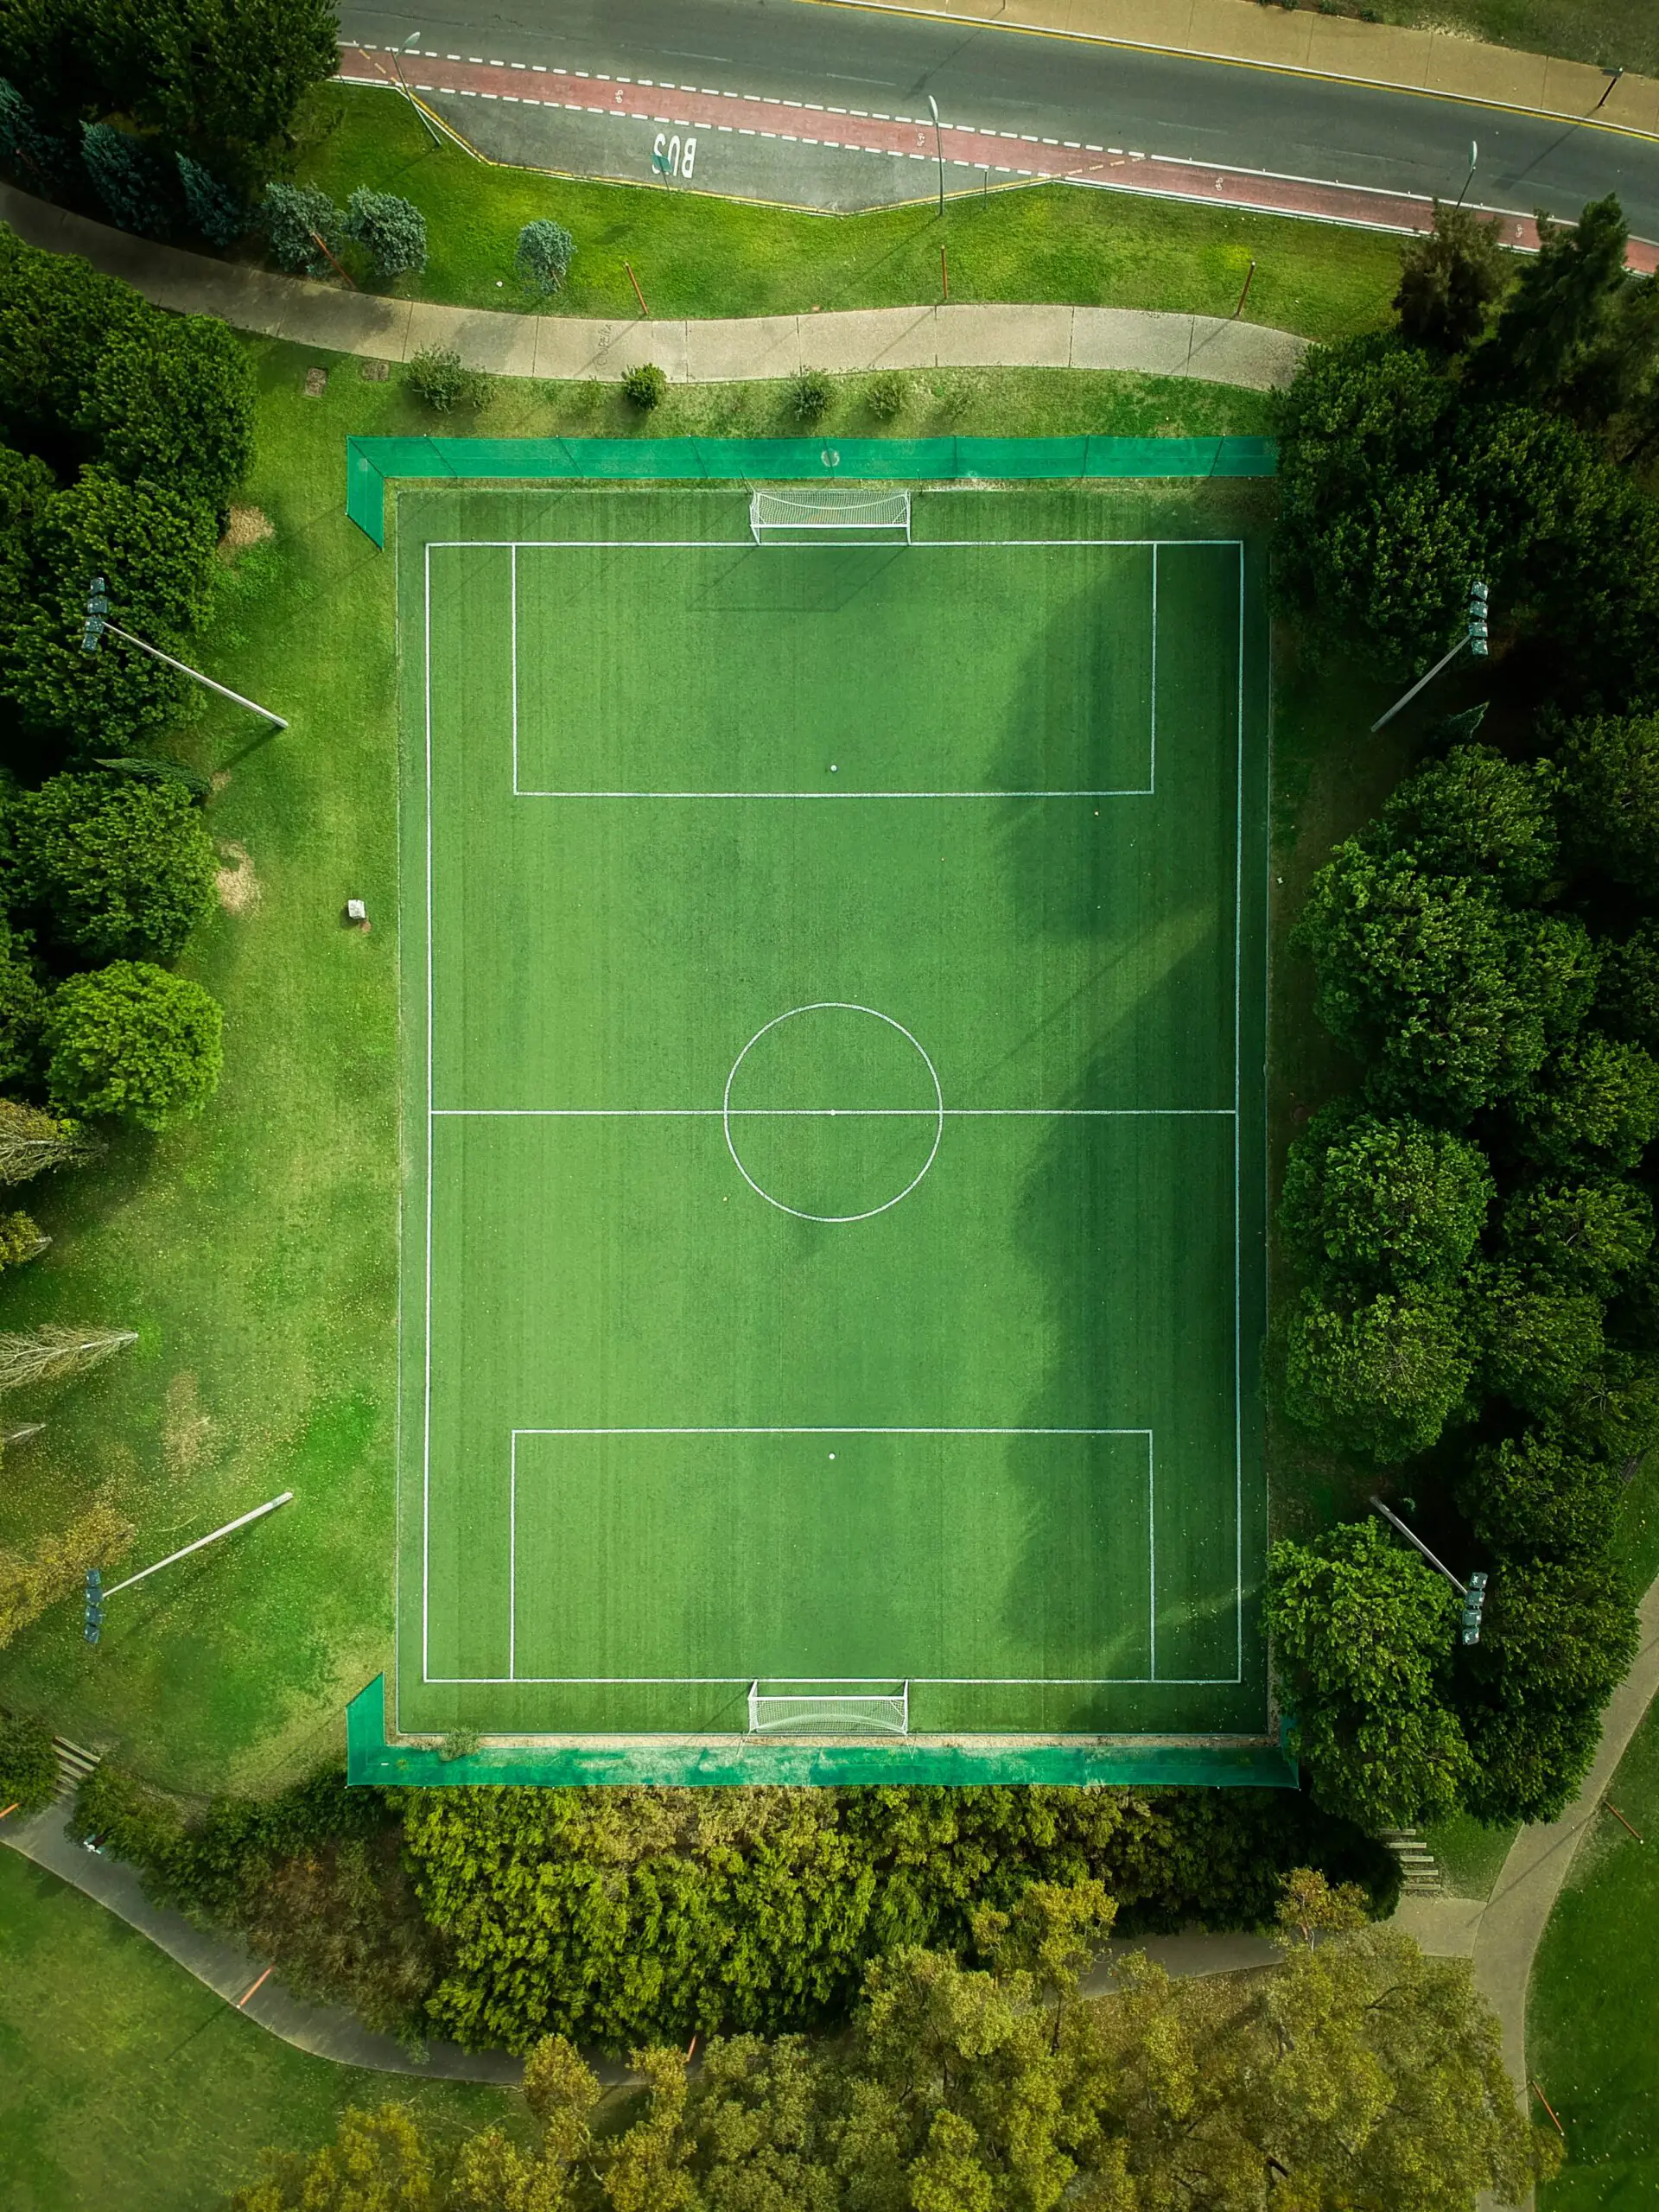 Football pitch with no changing rooms